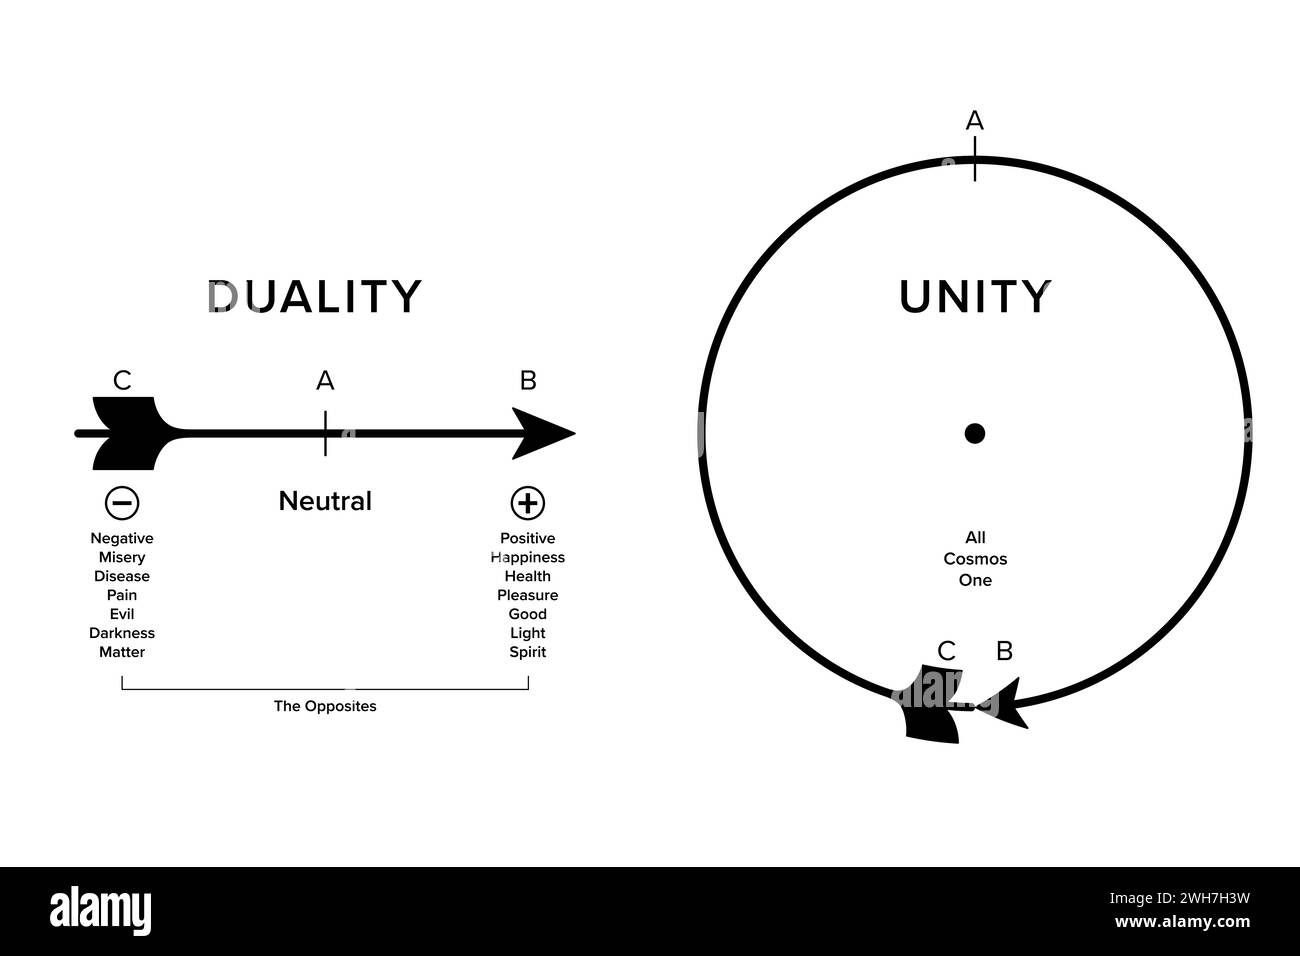 Duality and unity, a diagram, showing the dual law in all nature as an arrow. Positive and negative expressions are of the same principles. Stock Photo